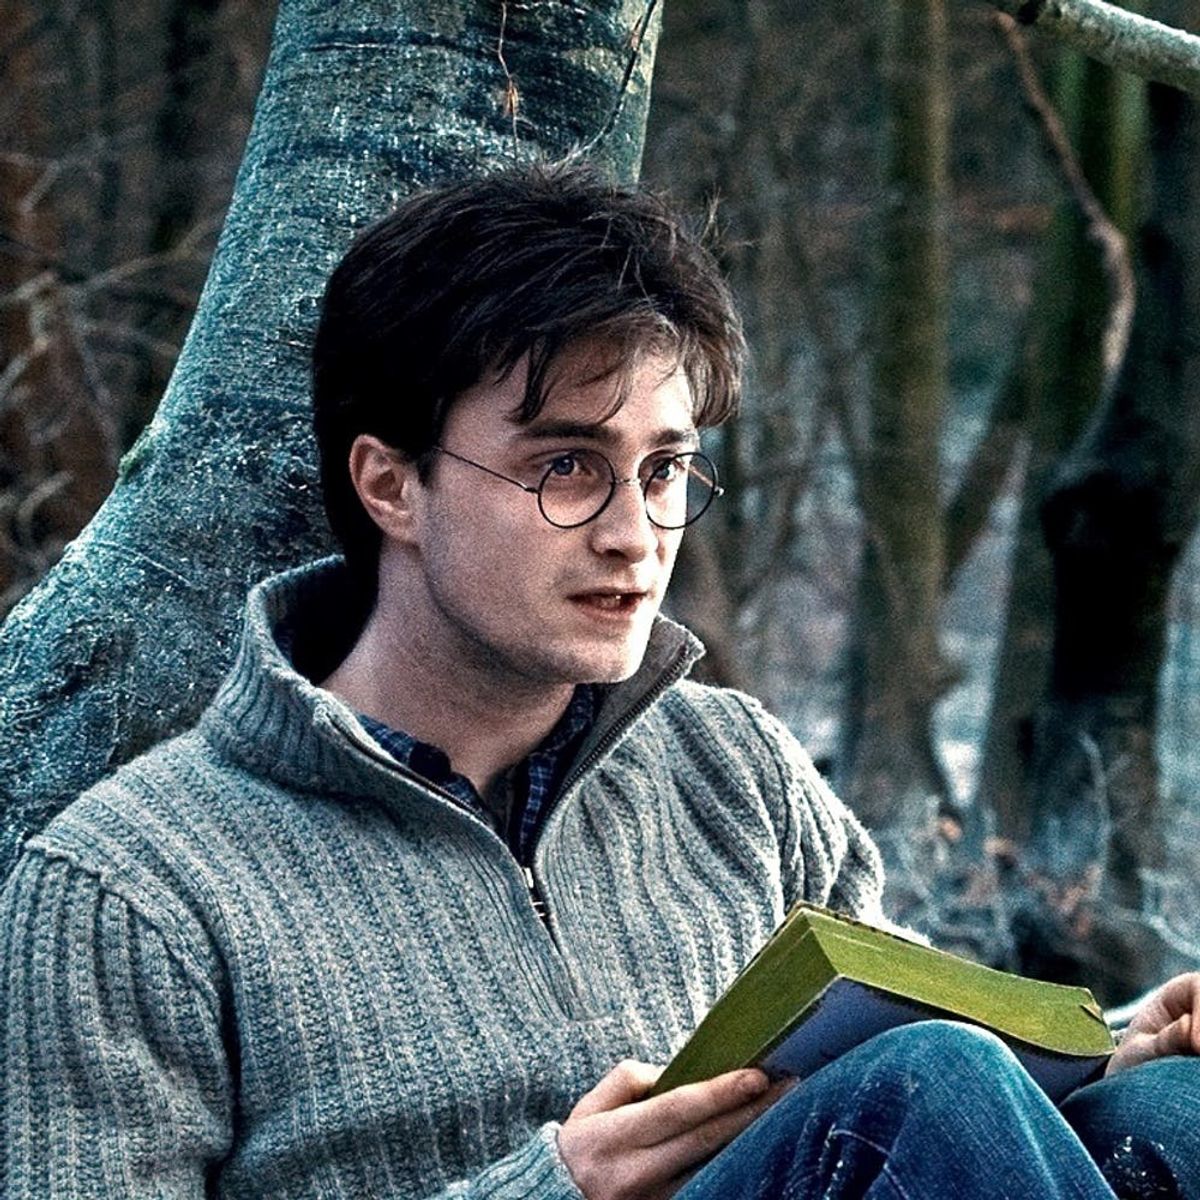 You Can Now Own Harry Potter’s Scariest Textbook